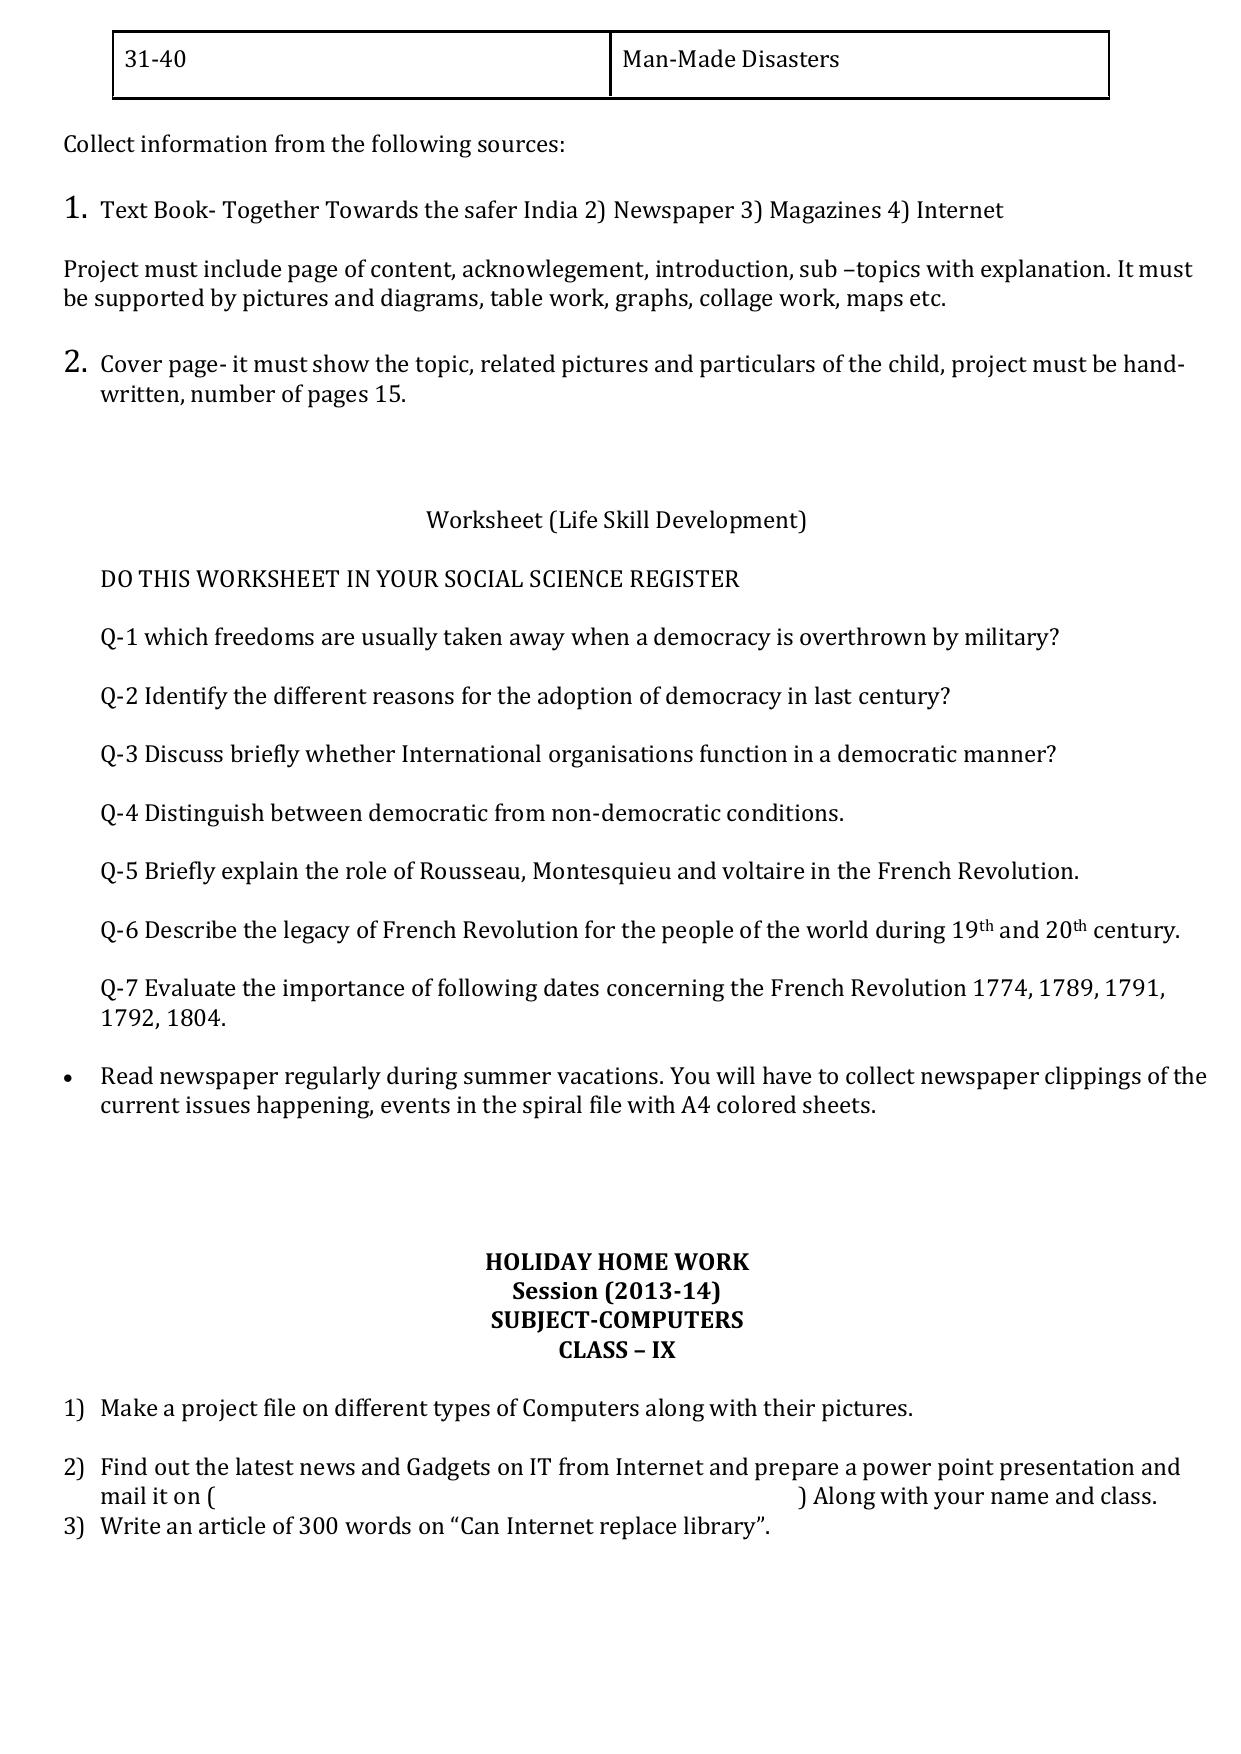 CBSE Worksheets for Class 9 Assignment 3 - Page 6